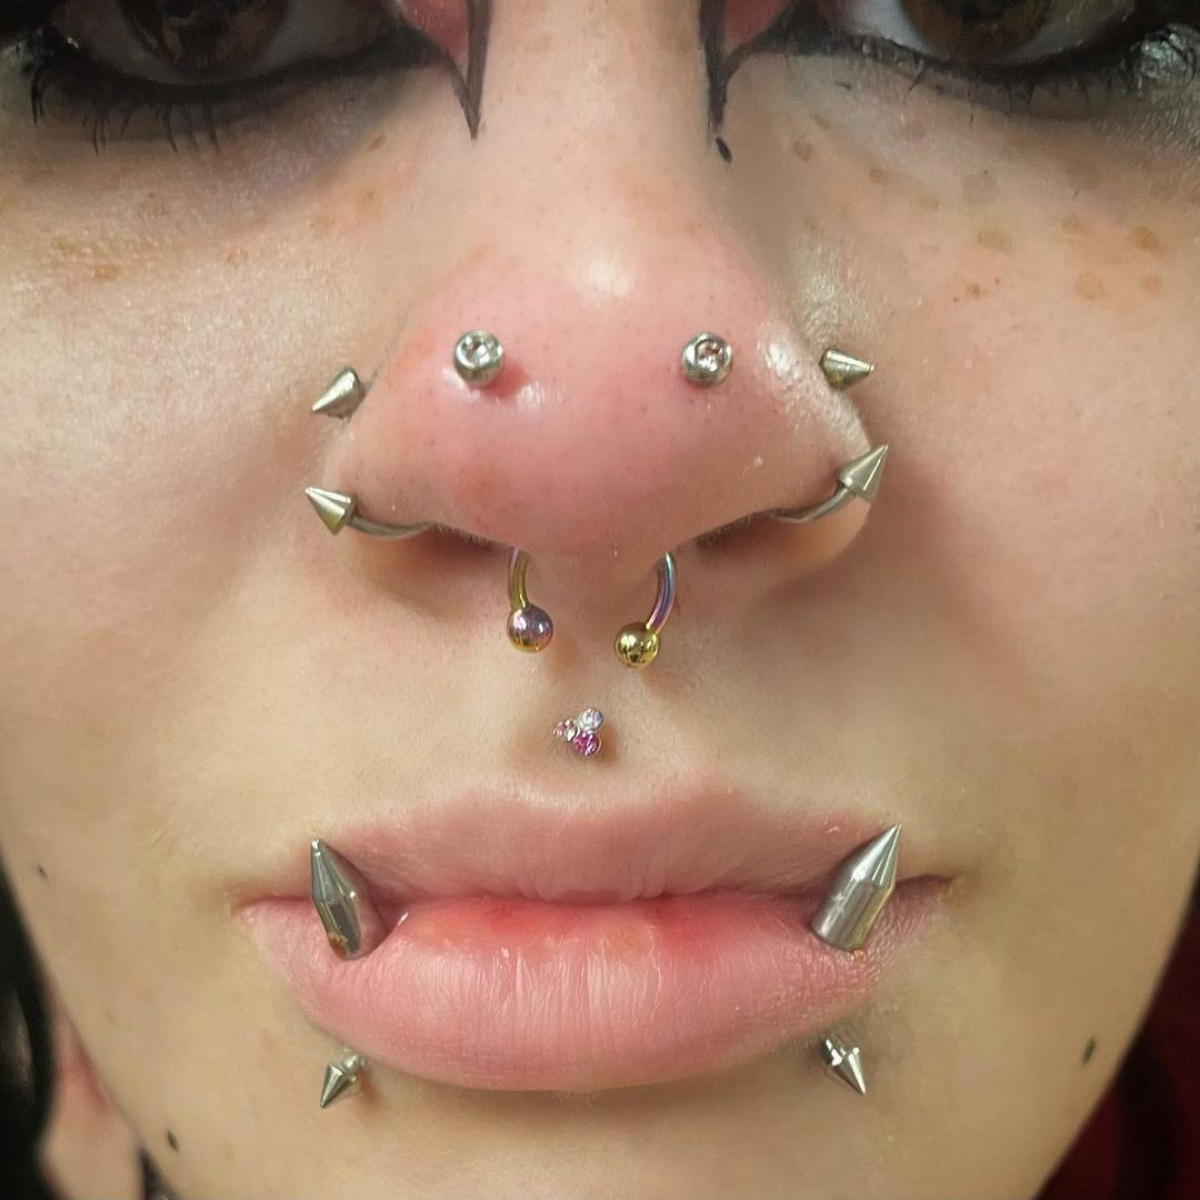 3 rhino piercing with two stones